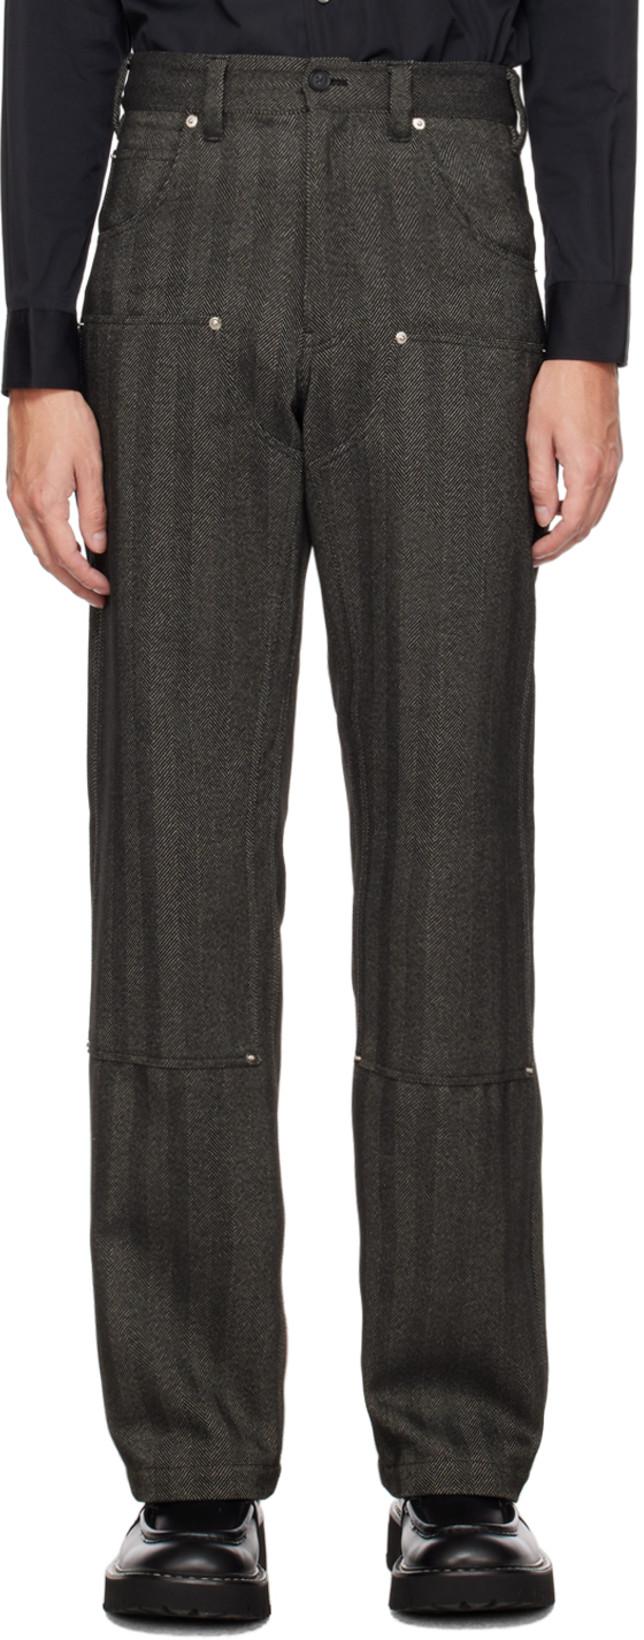 Gray Herringbone Trousers by COMMISSION